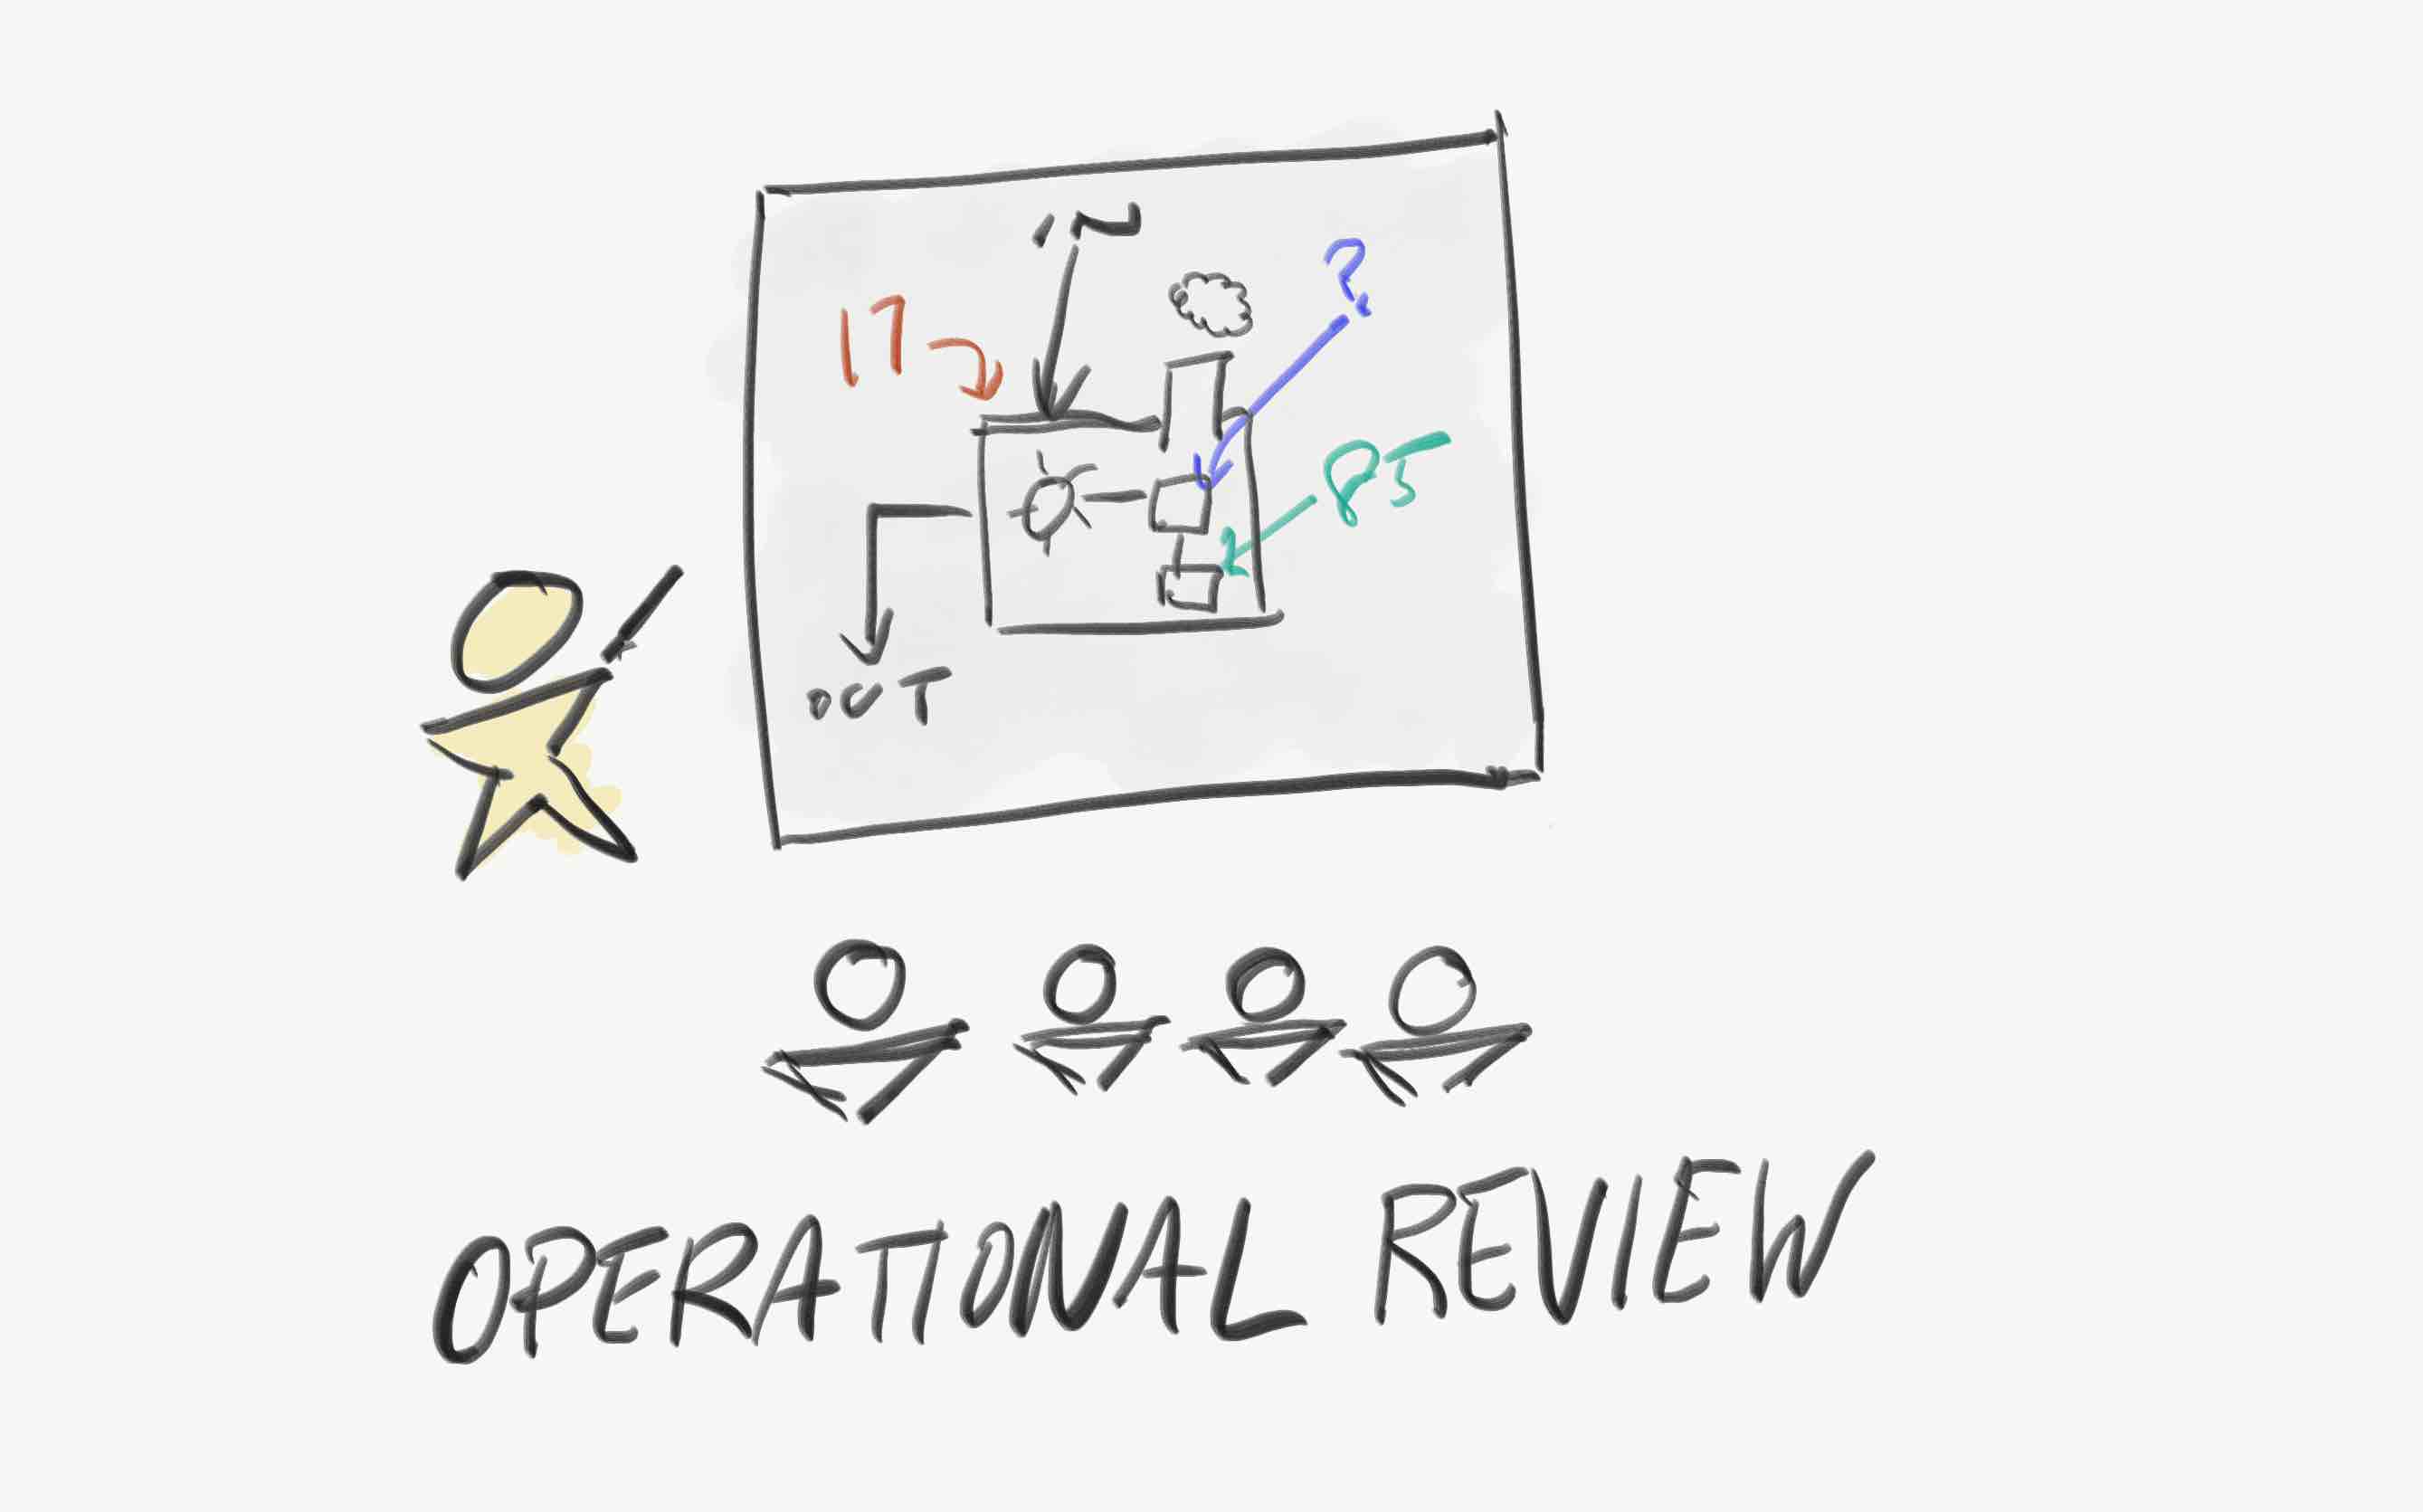 Operational Review Illustration